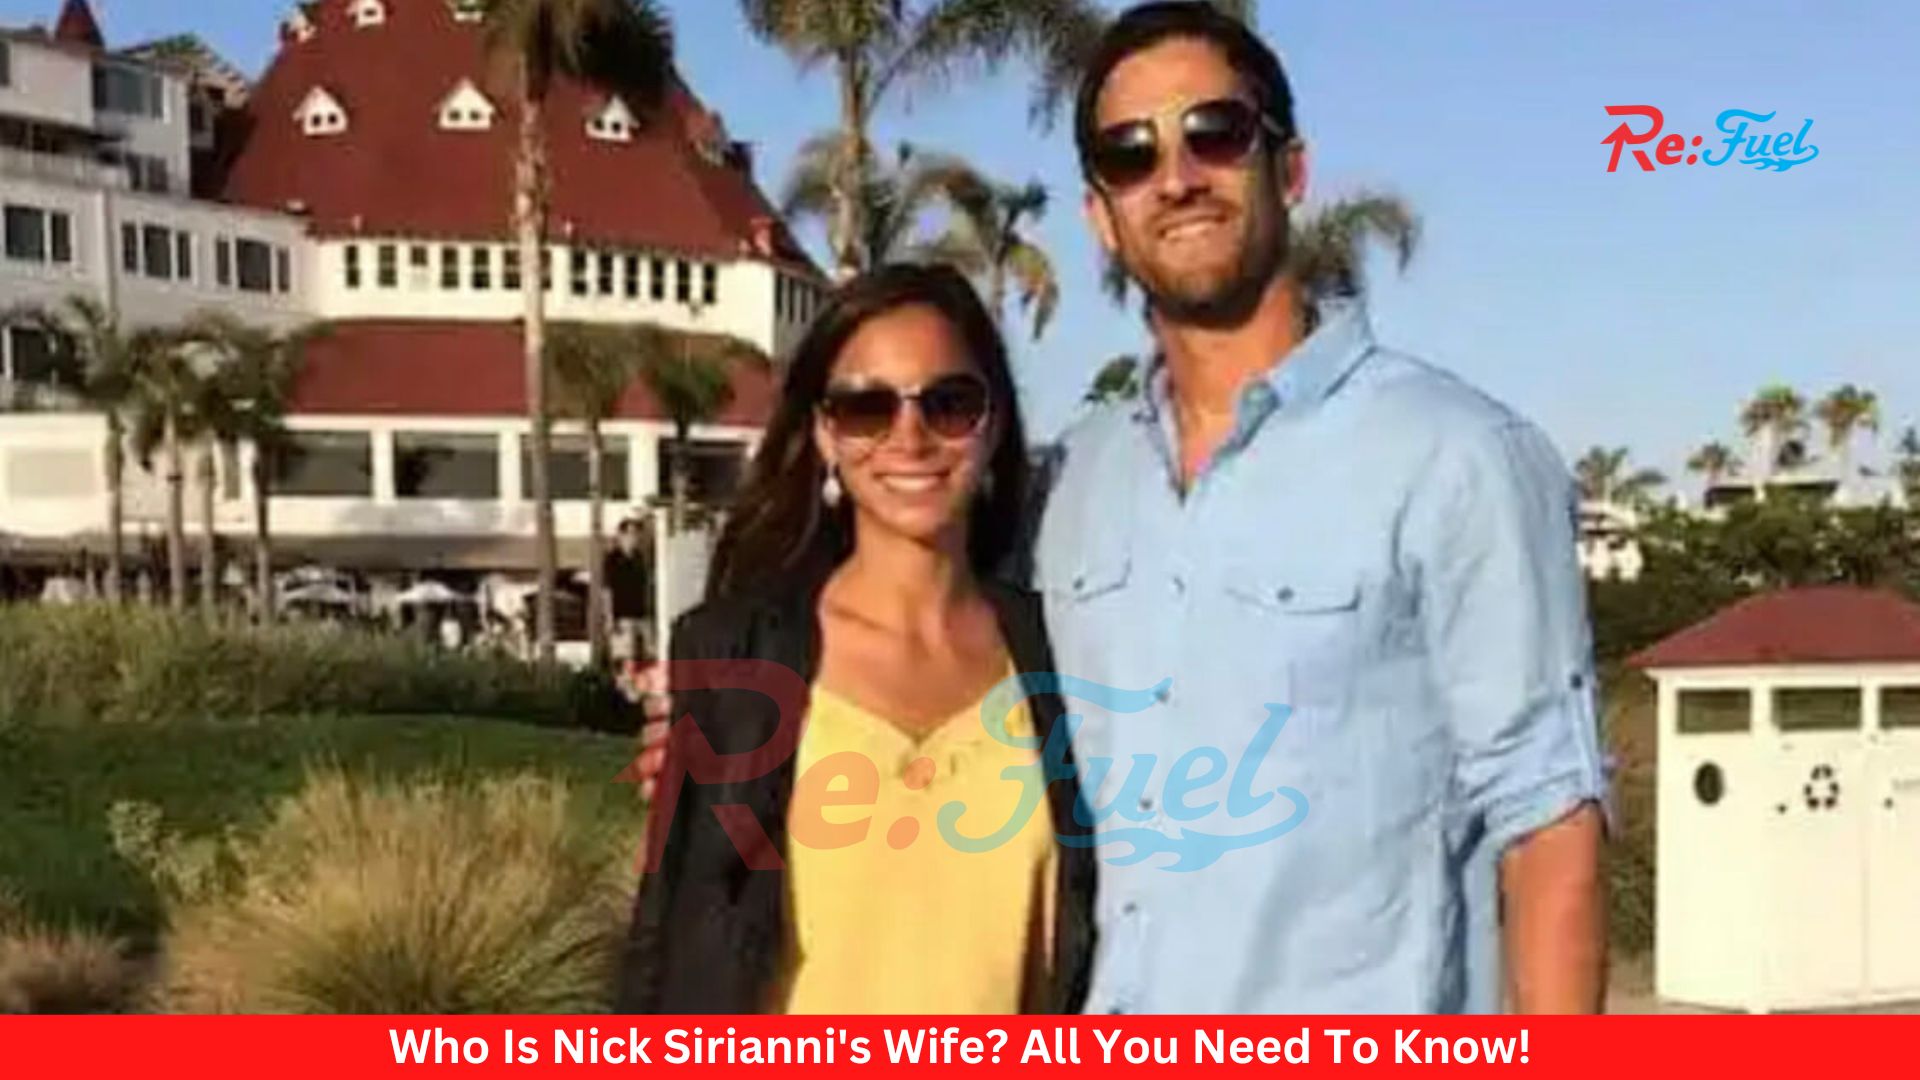 Who Is Nick Sirianni's Wife? All You Need To Know!